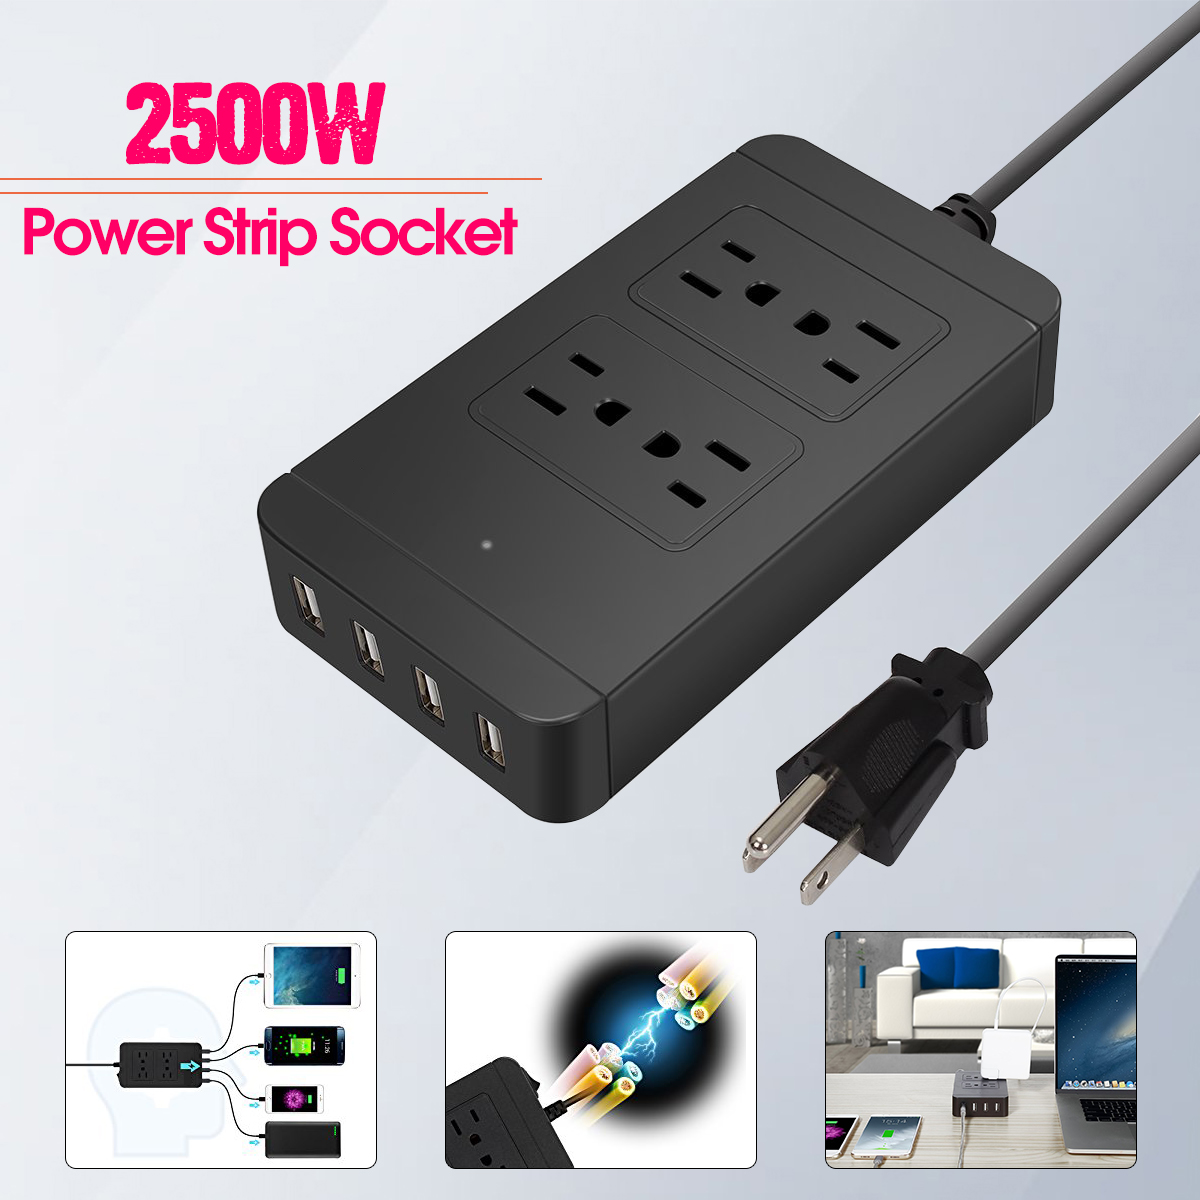 2500W-Power-Strip-Socket-4-AC-Outlets-4-USB-Ports-Charger-Smart-Power-Switch-Socket-US-1303091-1